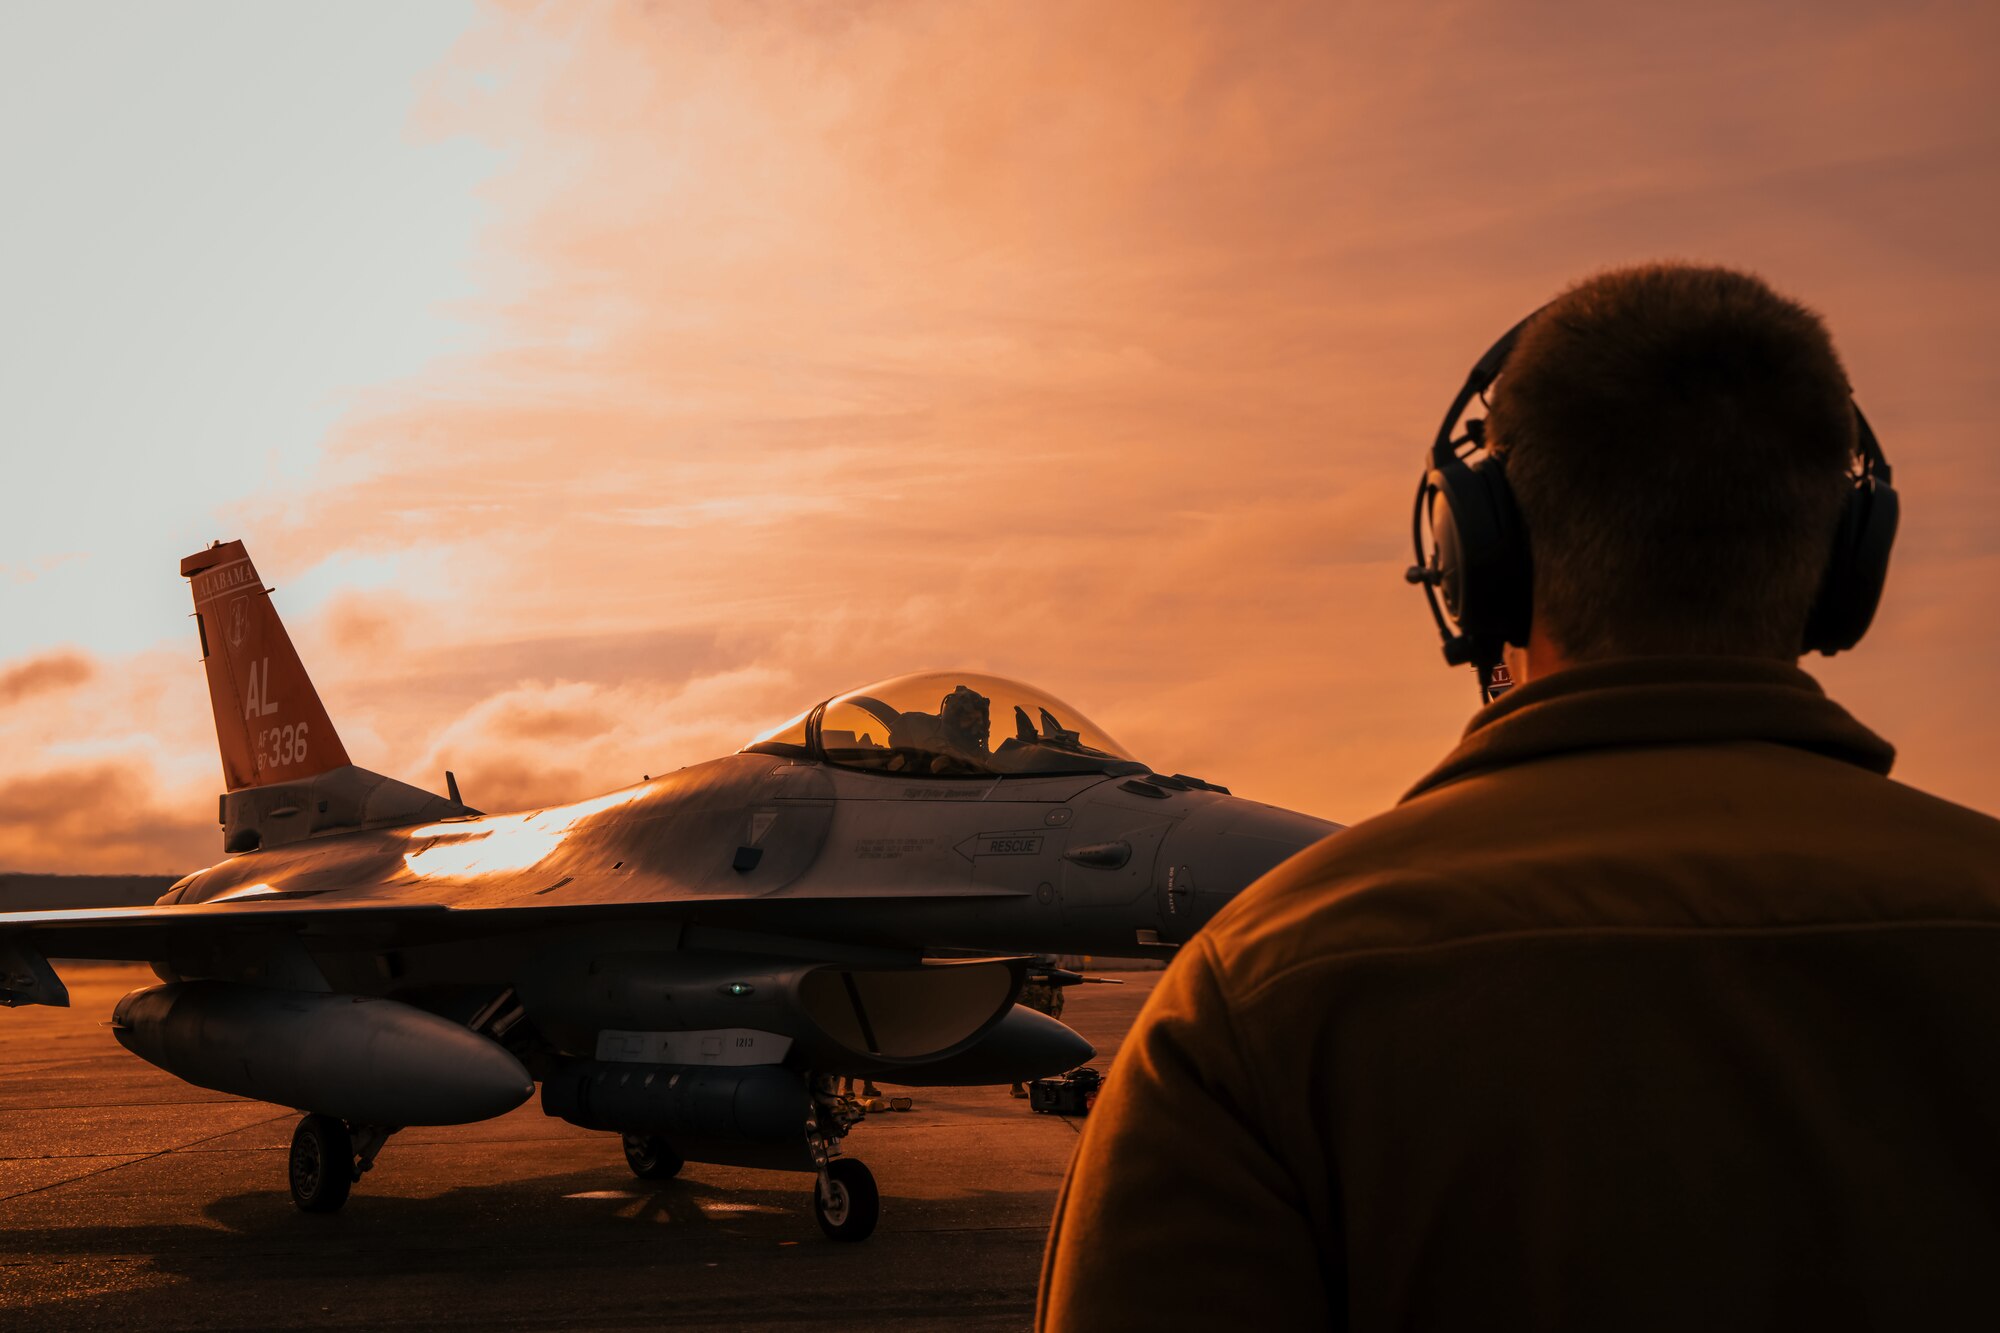 A crew chief from the 187th Fighter Wing prepares for an F-16C Fighting Falcon fighter aircraft to taxi and take off in Mobile, Alabama, during Southern Lightning Strike, an Agile Combat Employment exercise throughout the southeastern United States, November 4, 2021. The ACE construct is designed to provide optionality operationally throughout all domains, posturing the Department of Defense for strategic competition. (U.S. Air Force photo by Tech. Sgt. William Blankenship)